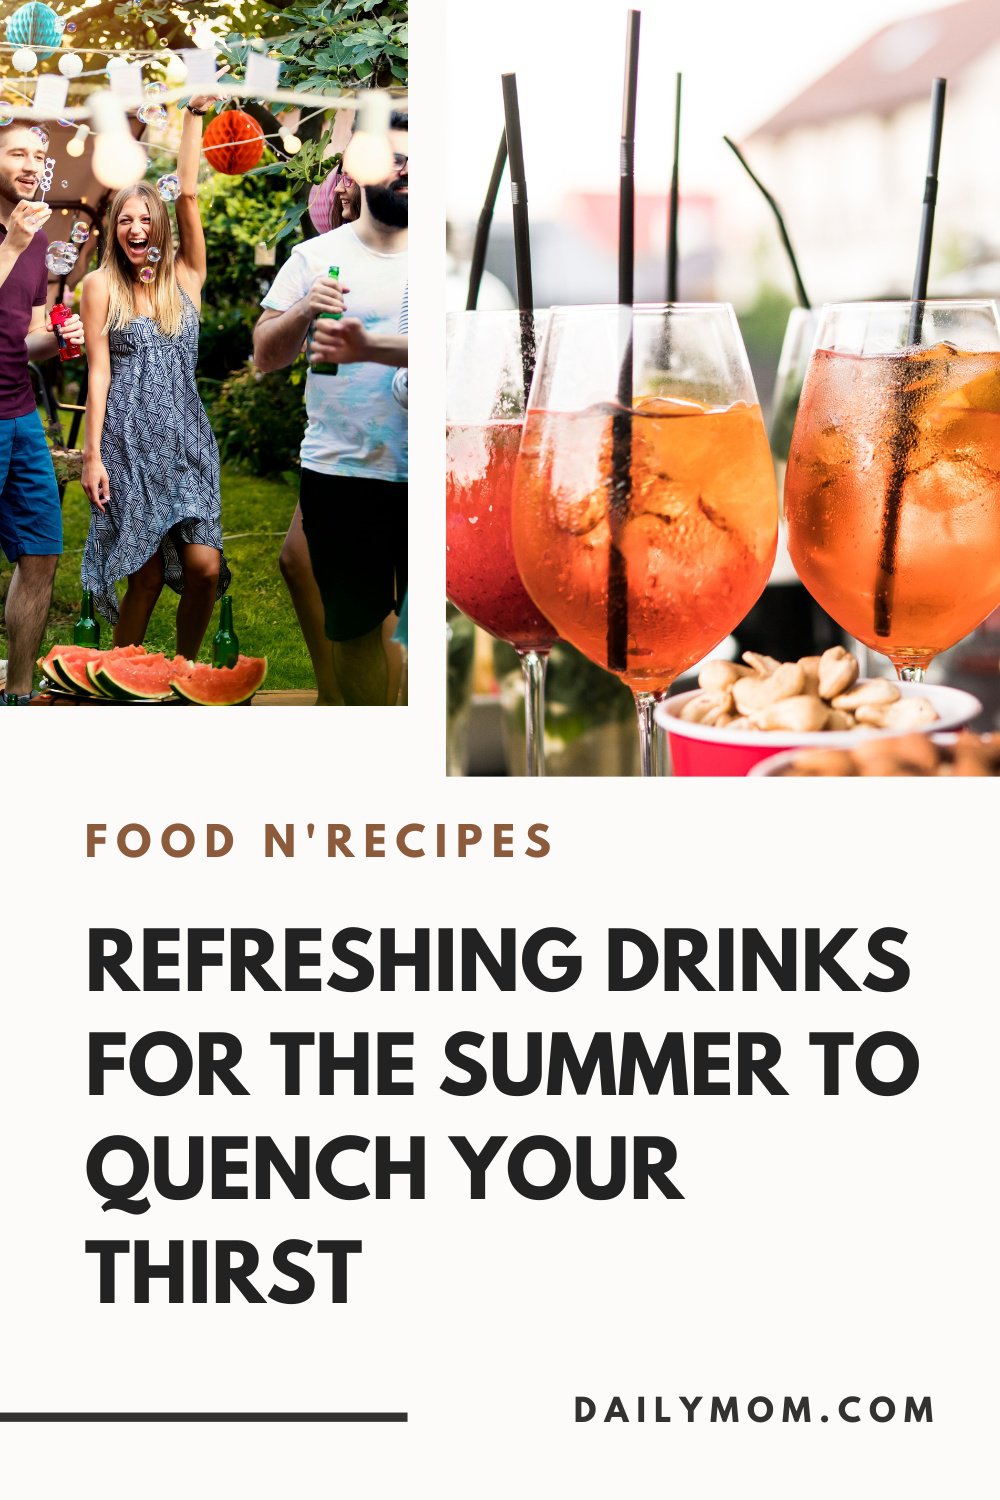 22 Refreshing Drinks For The Summer To Quench Your Thirst